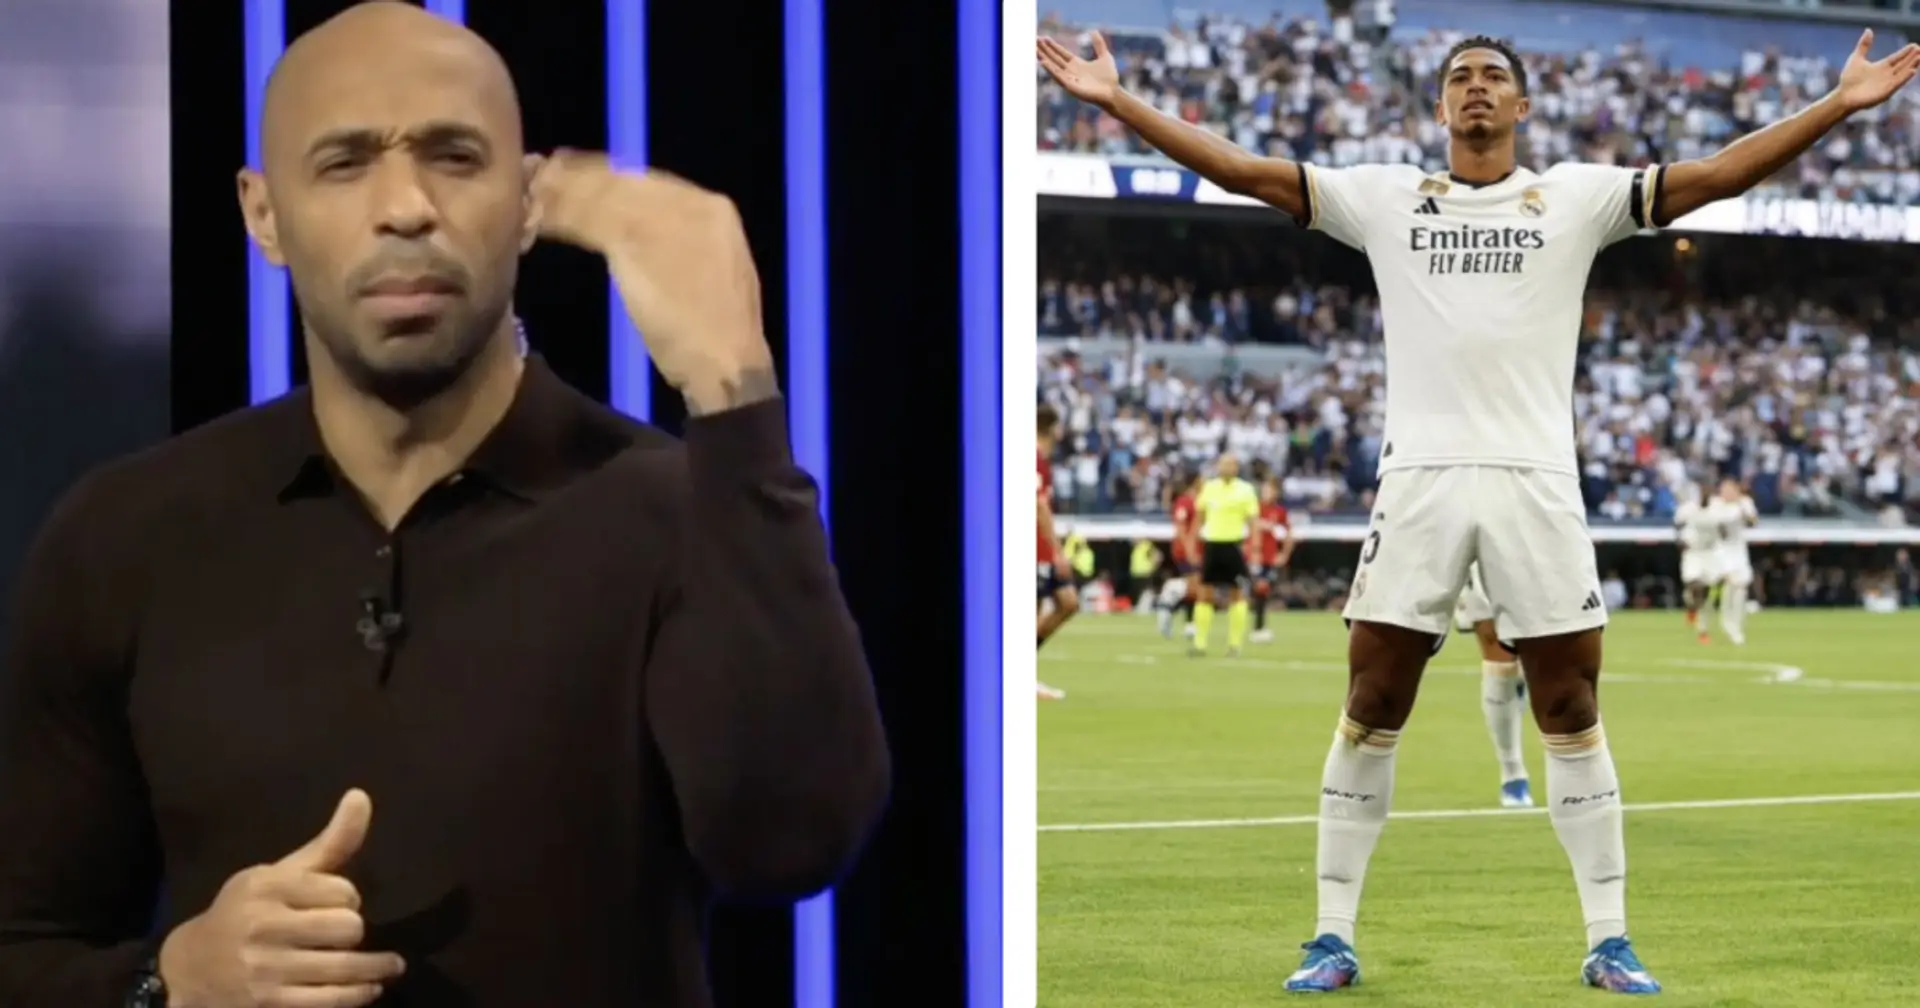 'You take Zidane's no. 5 and celebrate like this?': Thierry Henry message for Jude Bellingham goes viral